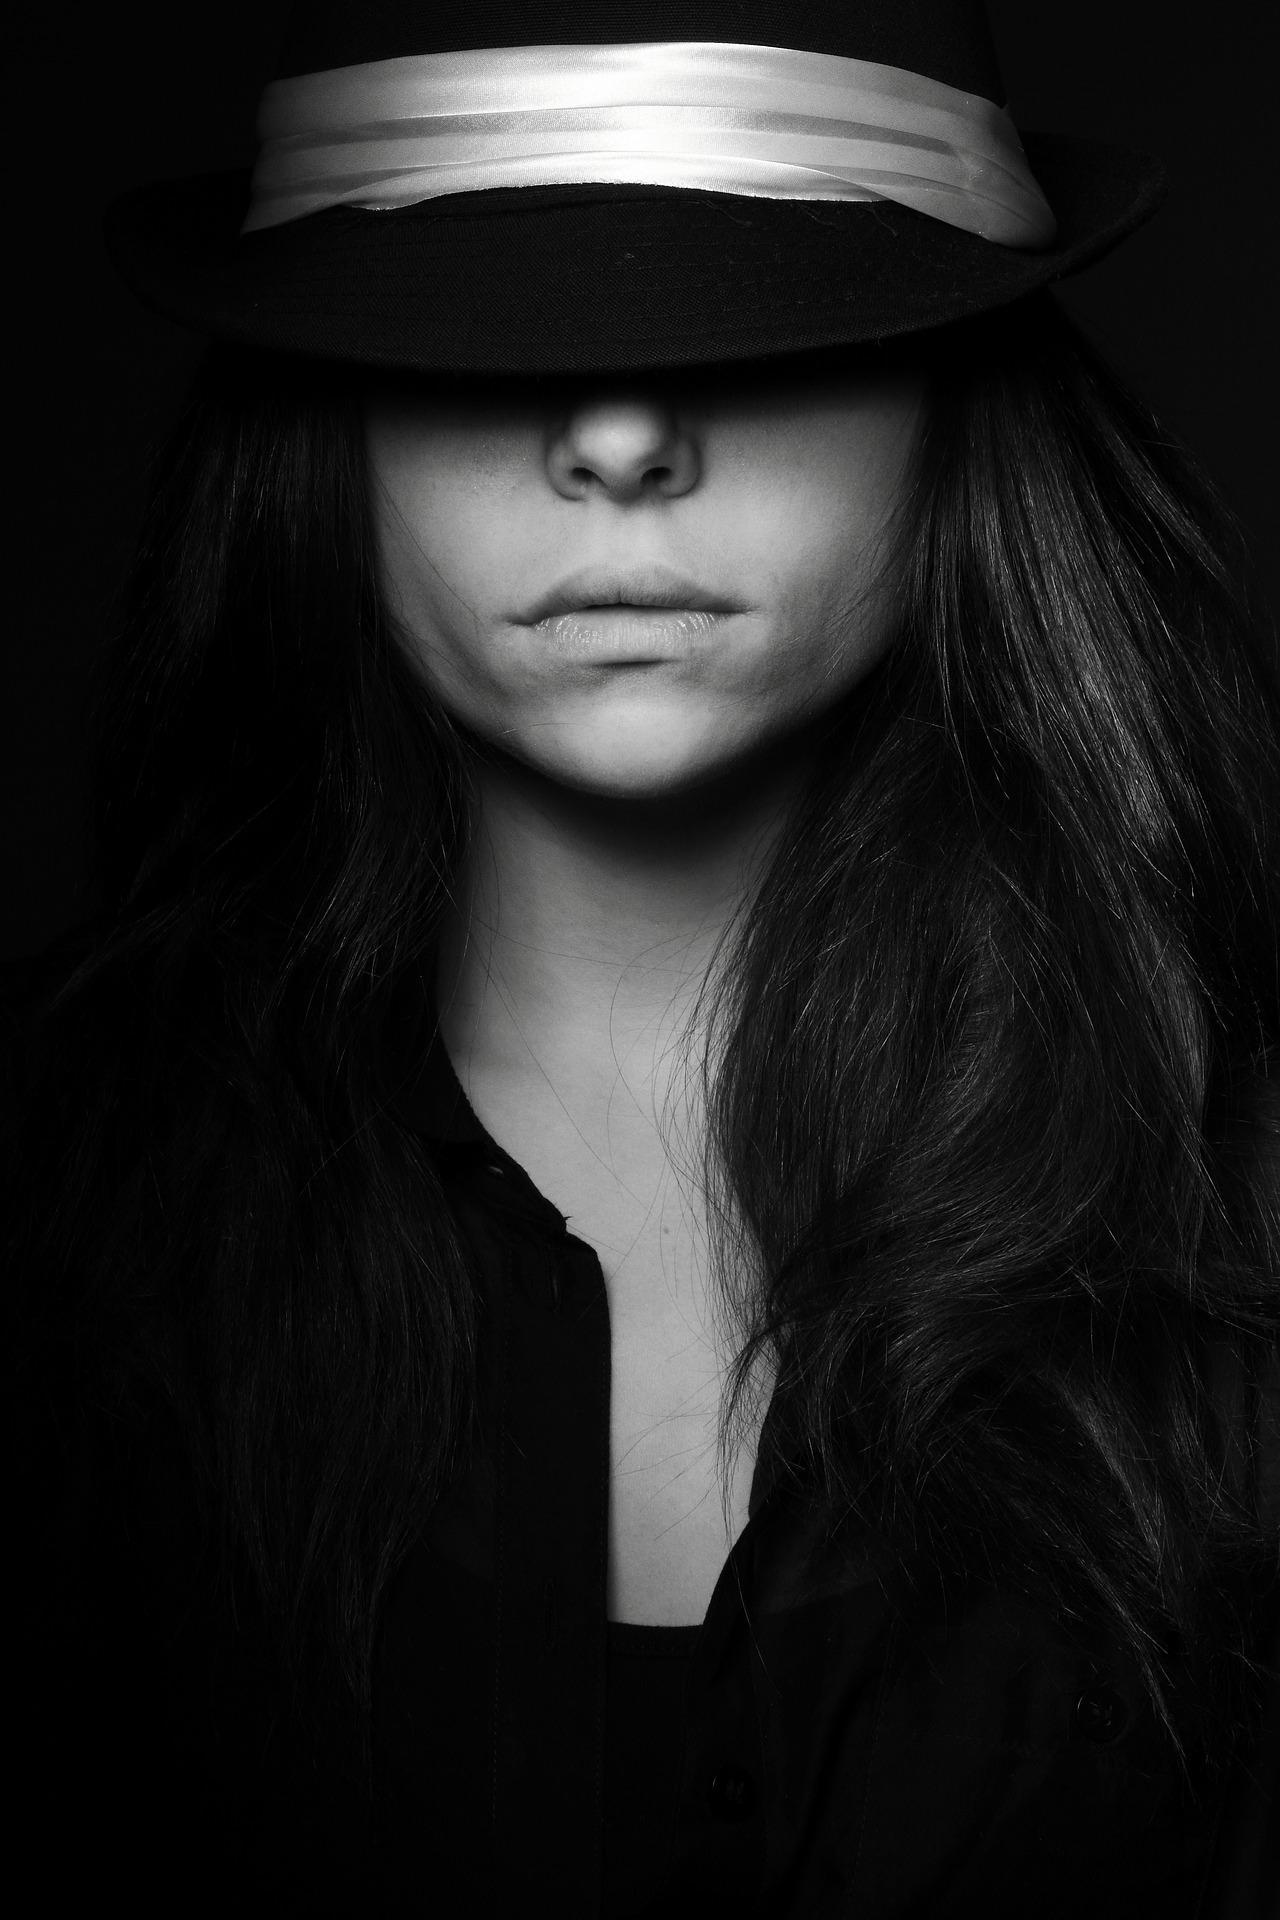 Girl Wallpaper in Black and White for Android